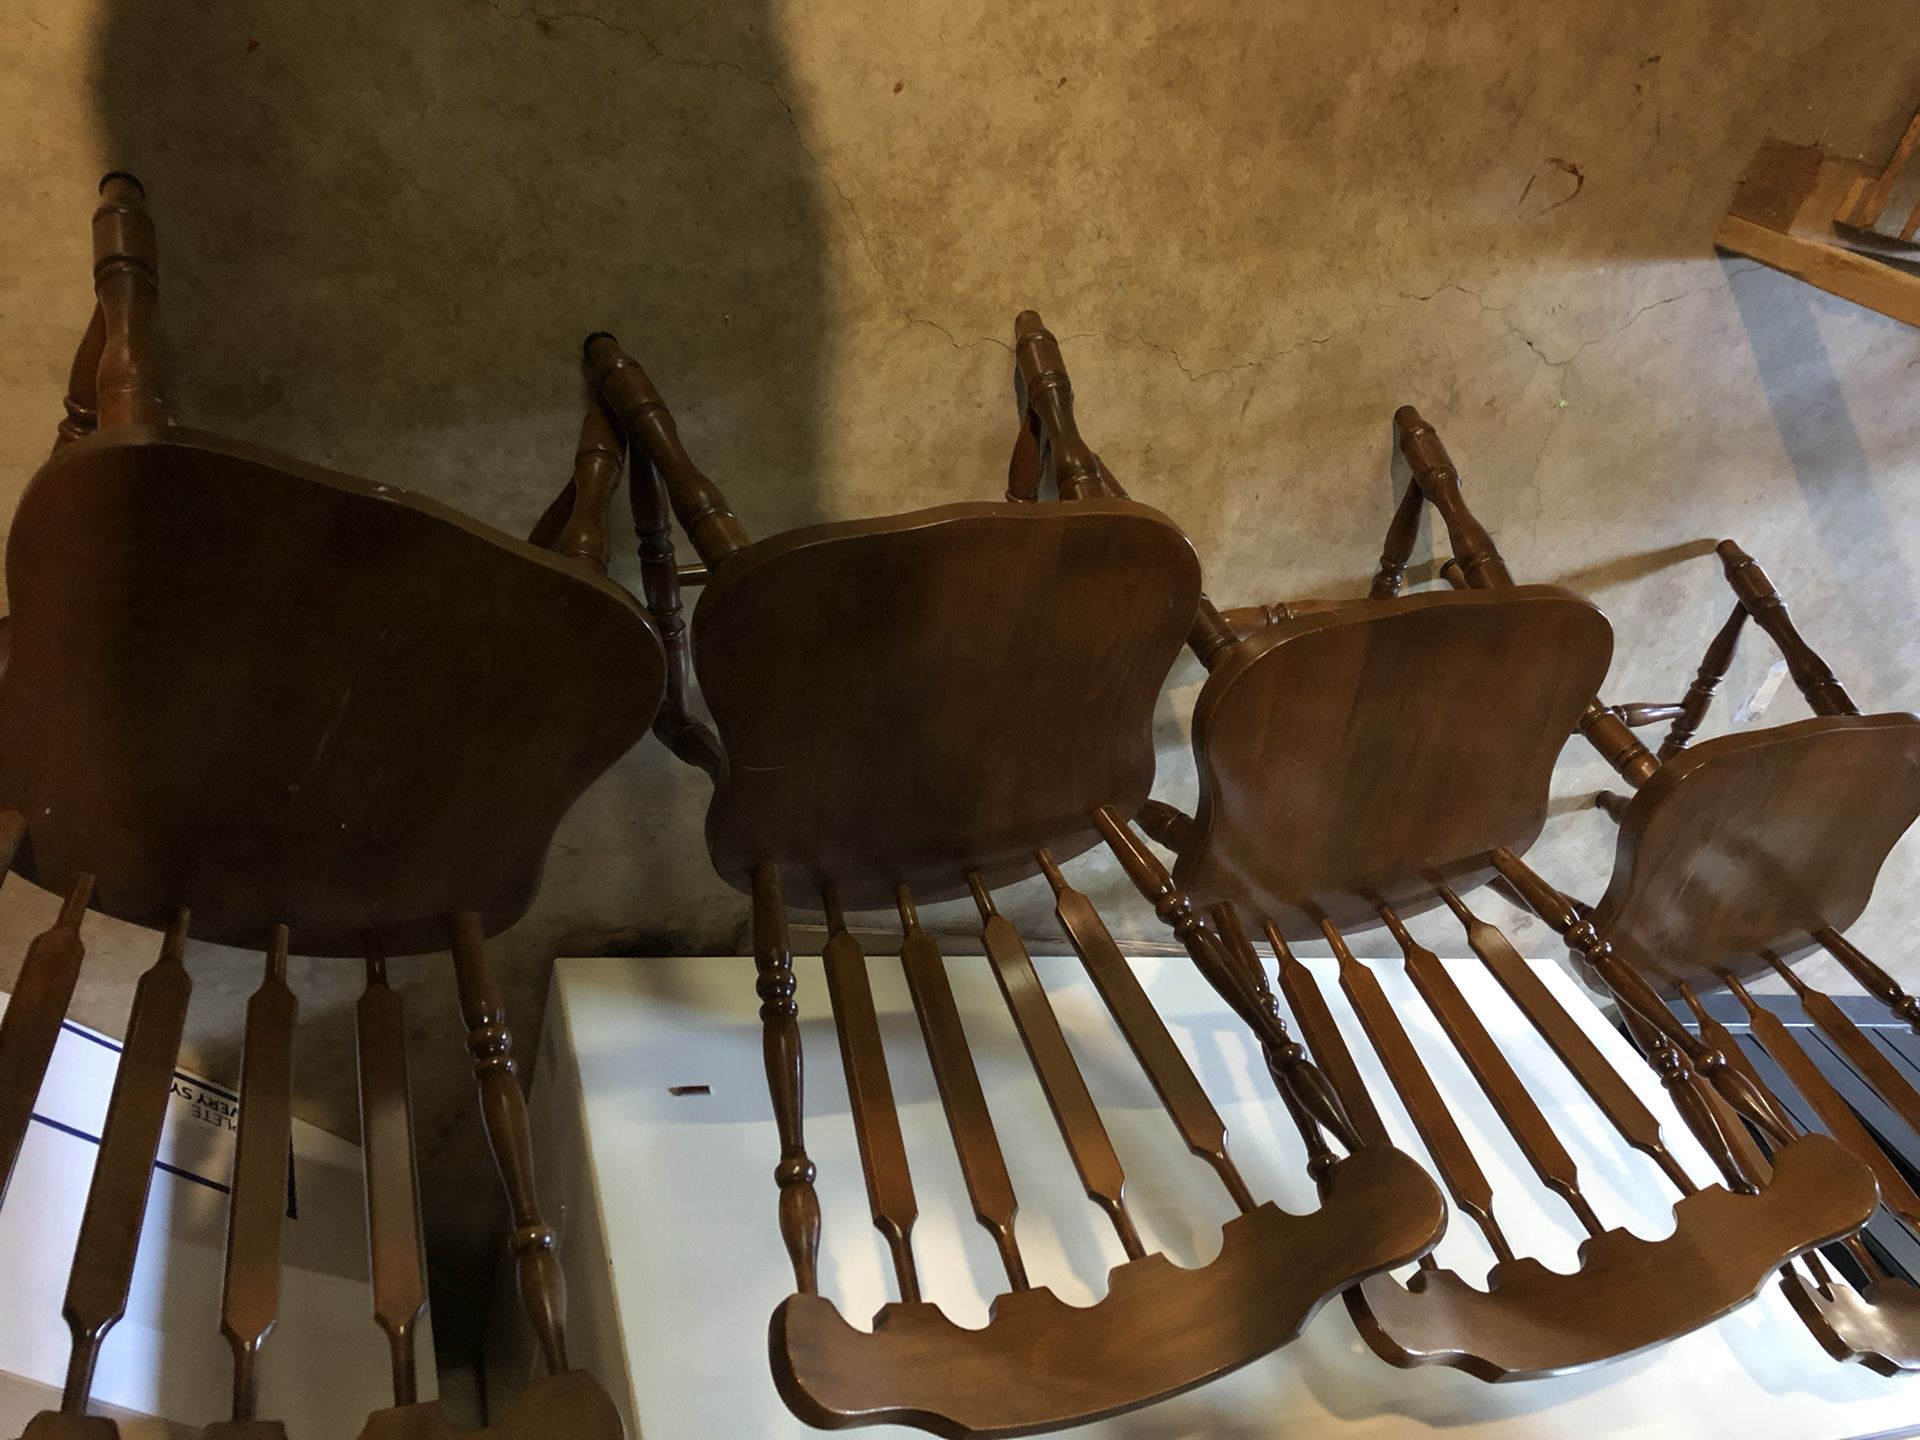 Set of 4 wood chairs